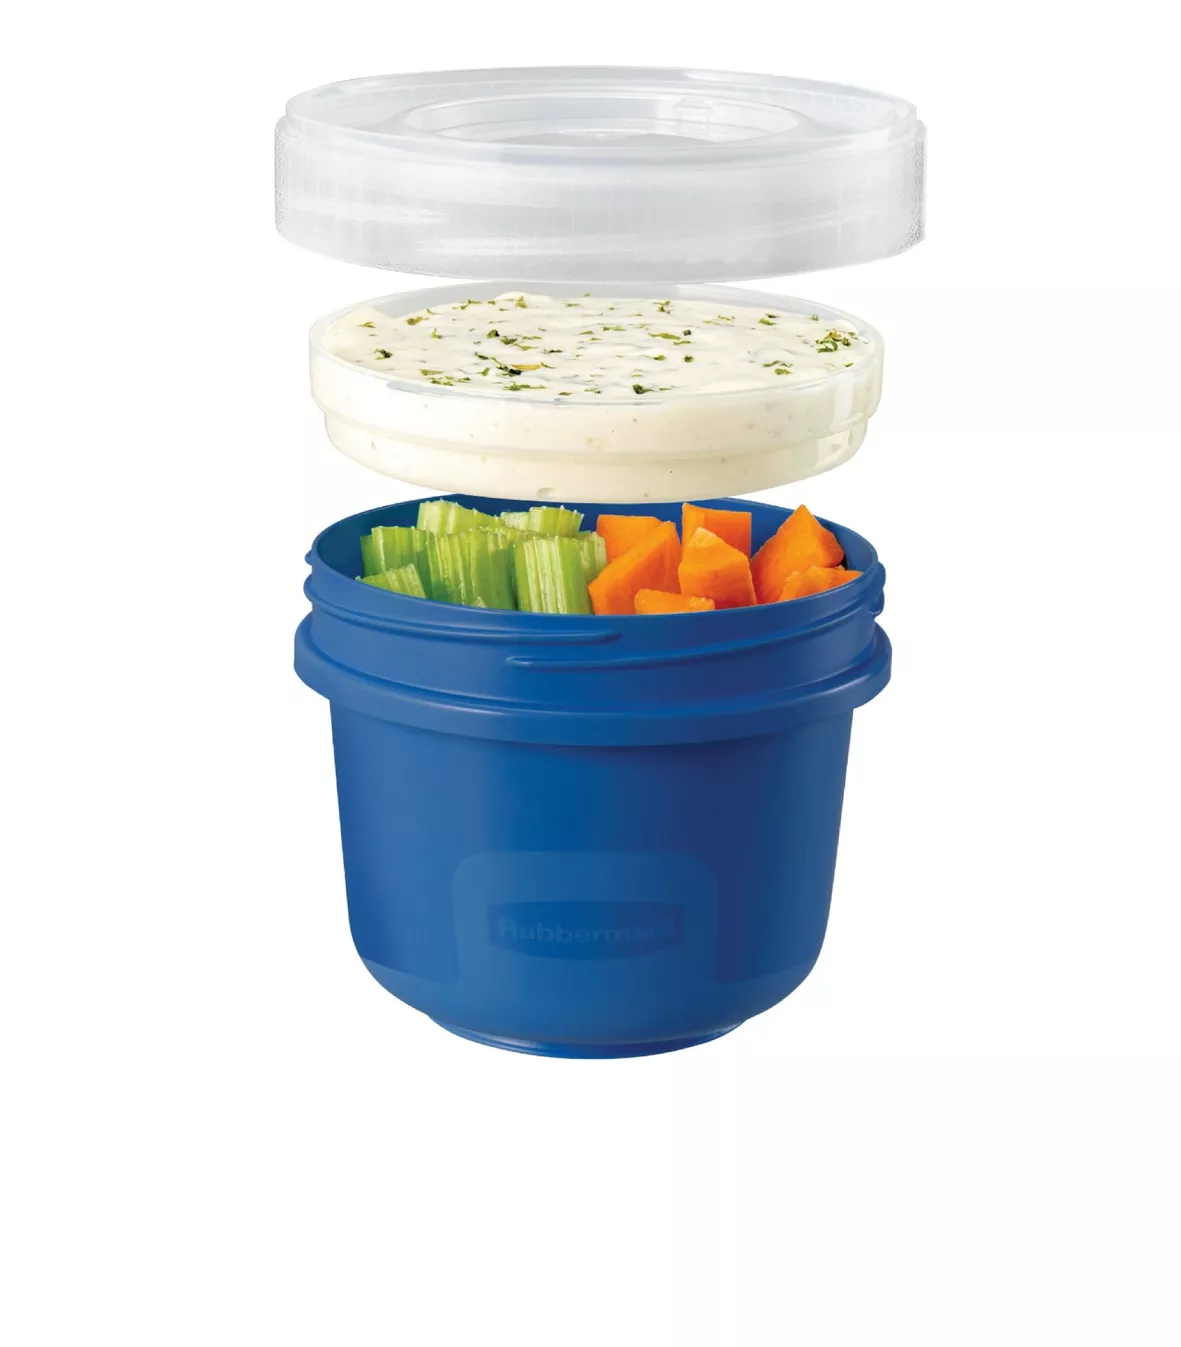 Rubbermaid TakeAlongs On the Go Food Storage and Meal Prep